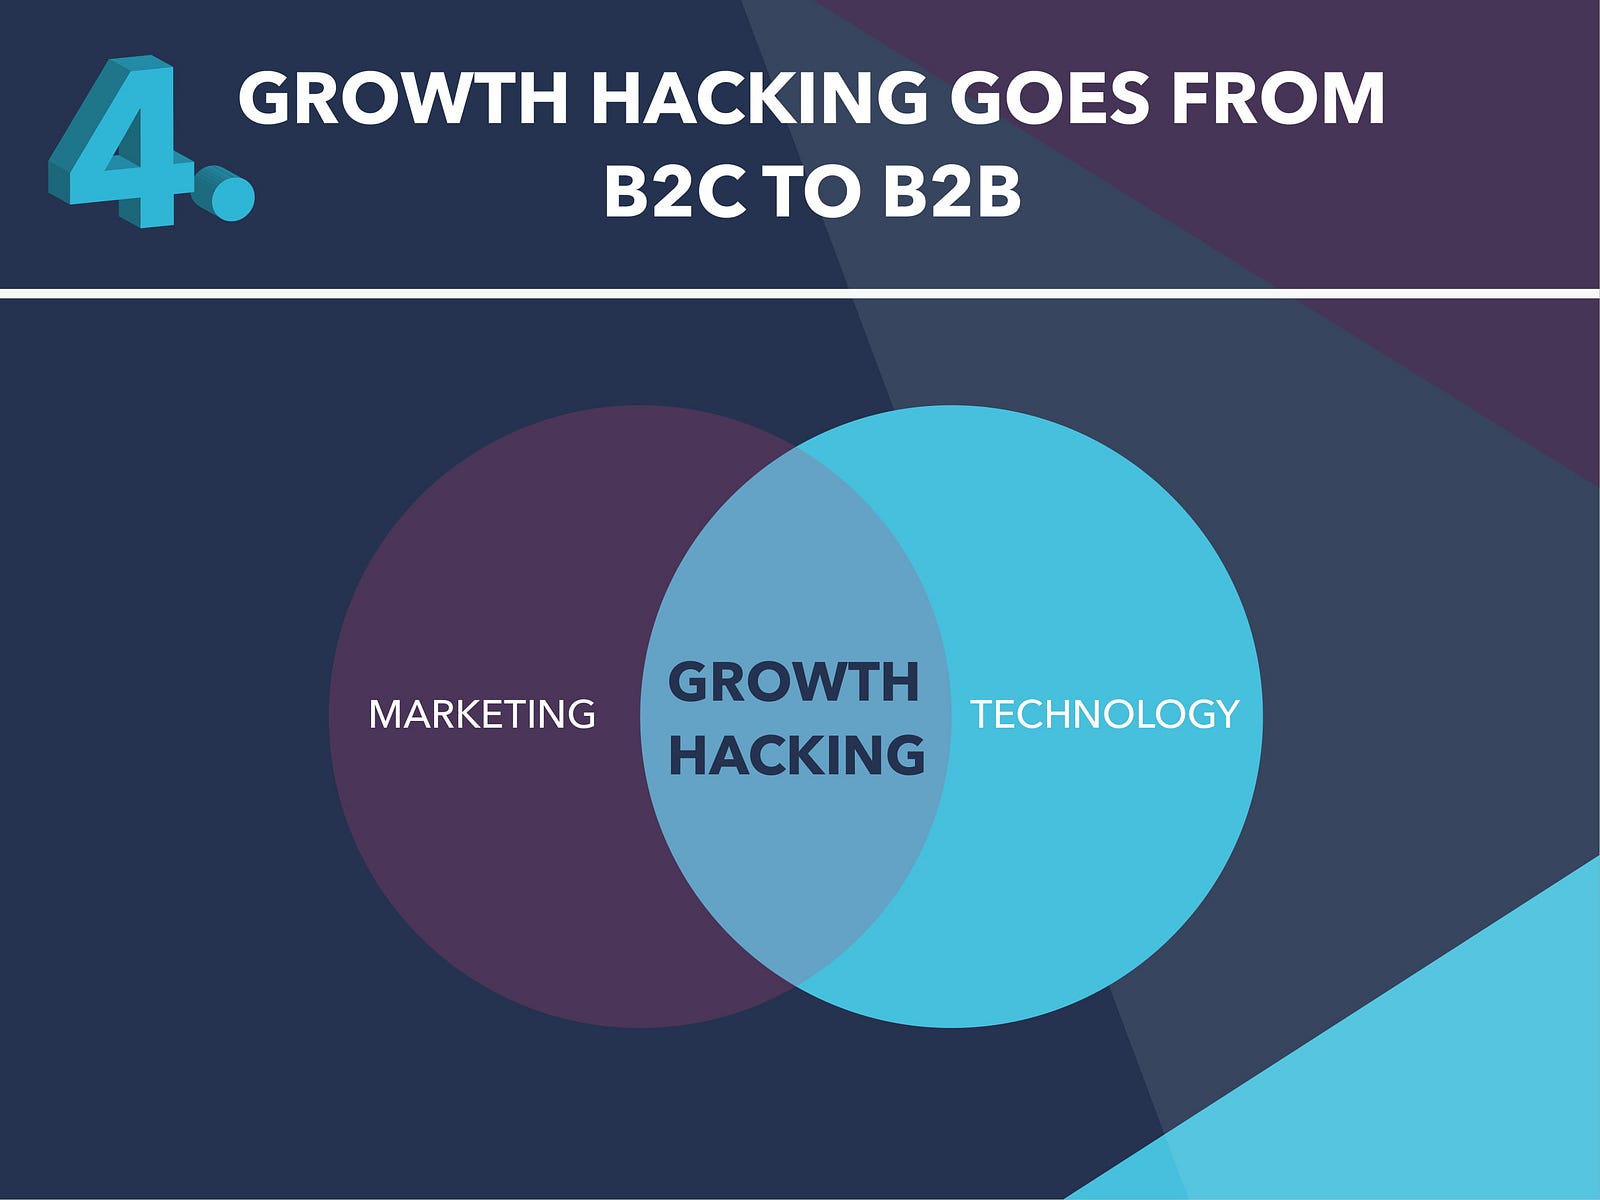 A Look At The Future Of B2B Marketing [4 Trends That Could Change